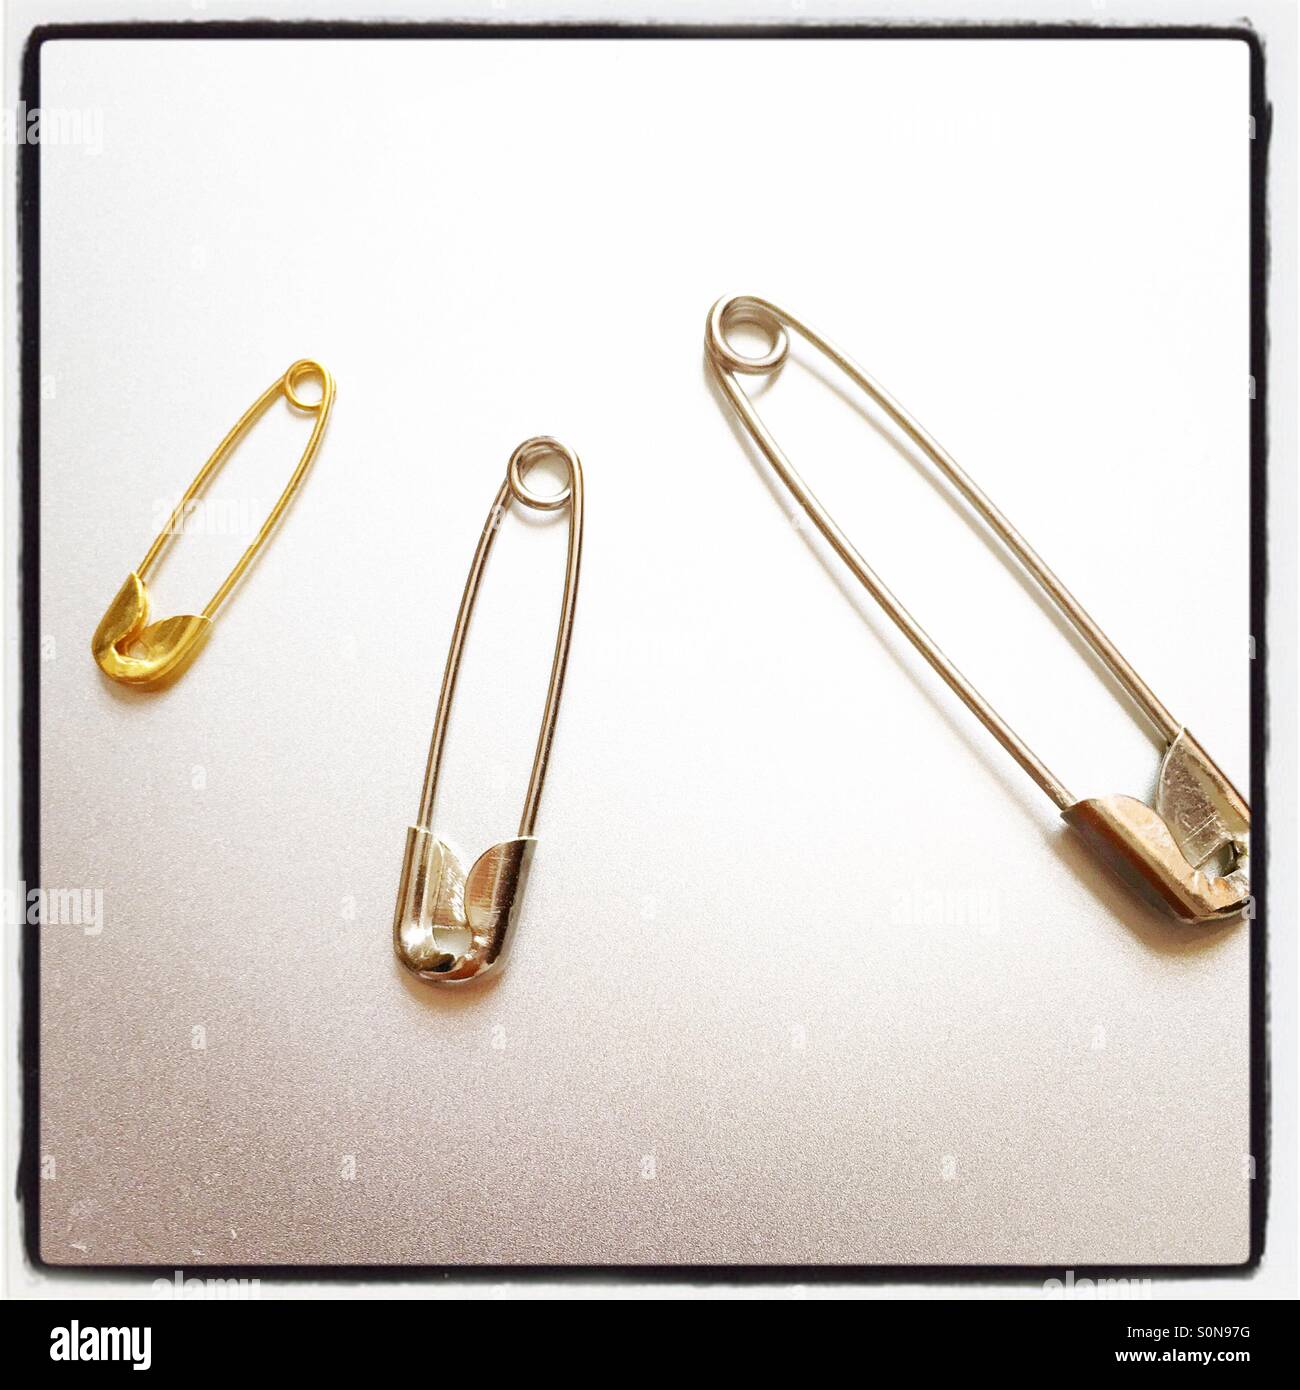 Three safety pins of differing size. Stock Photo